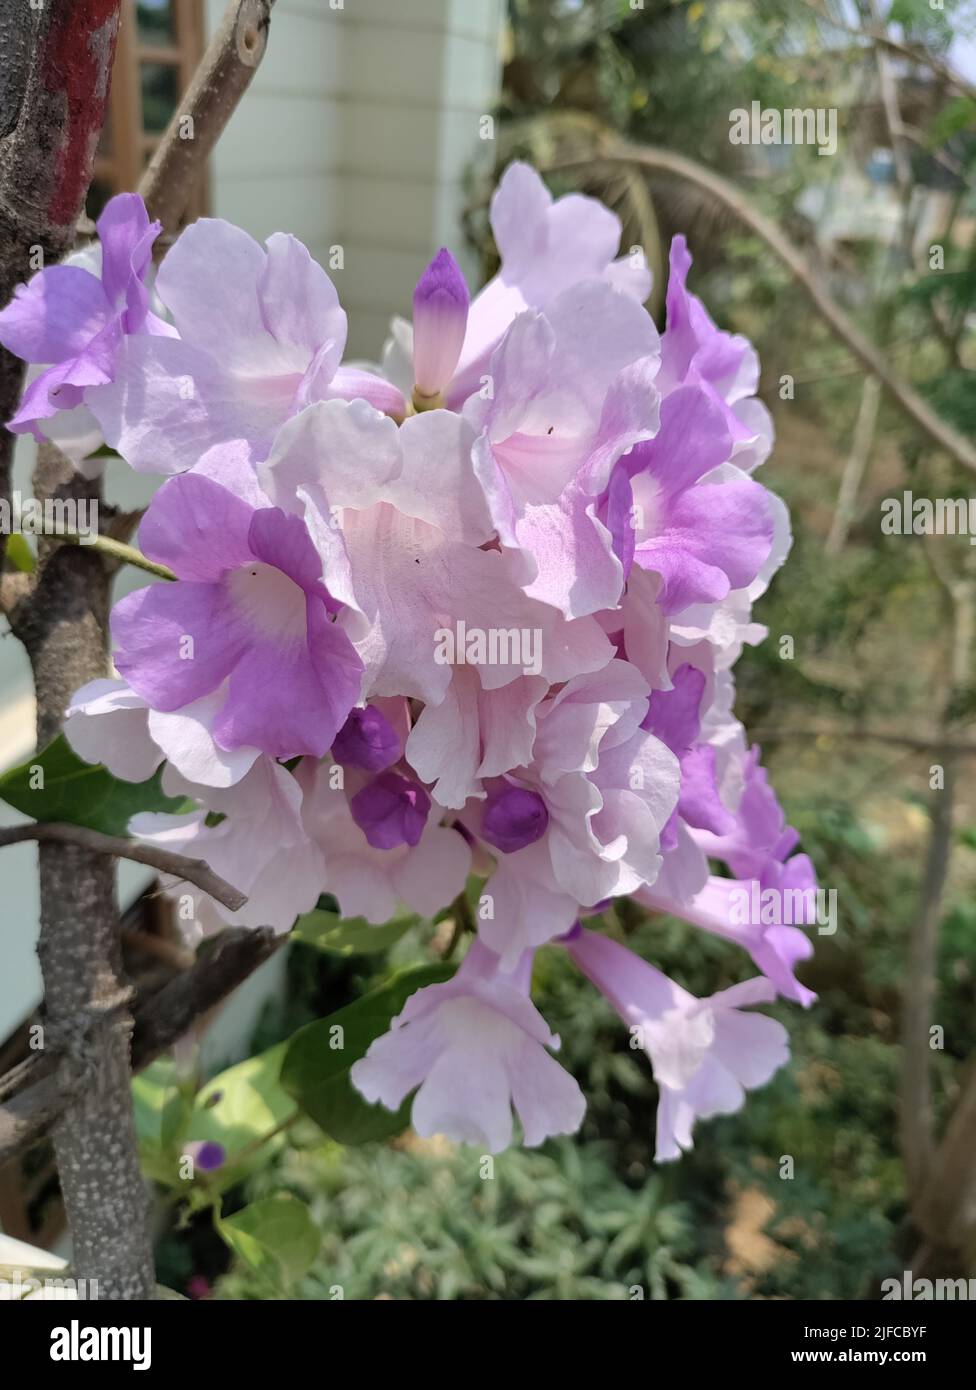 A closeup shot of Mansoa alliacea purple flower species on twigs with trees in the background Stock Photo